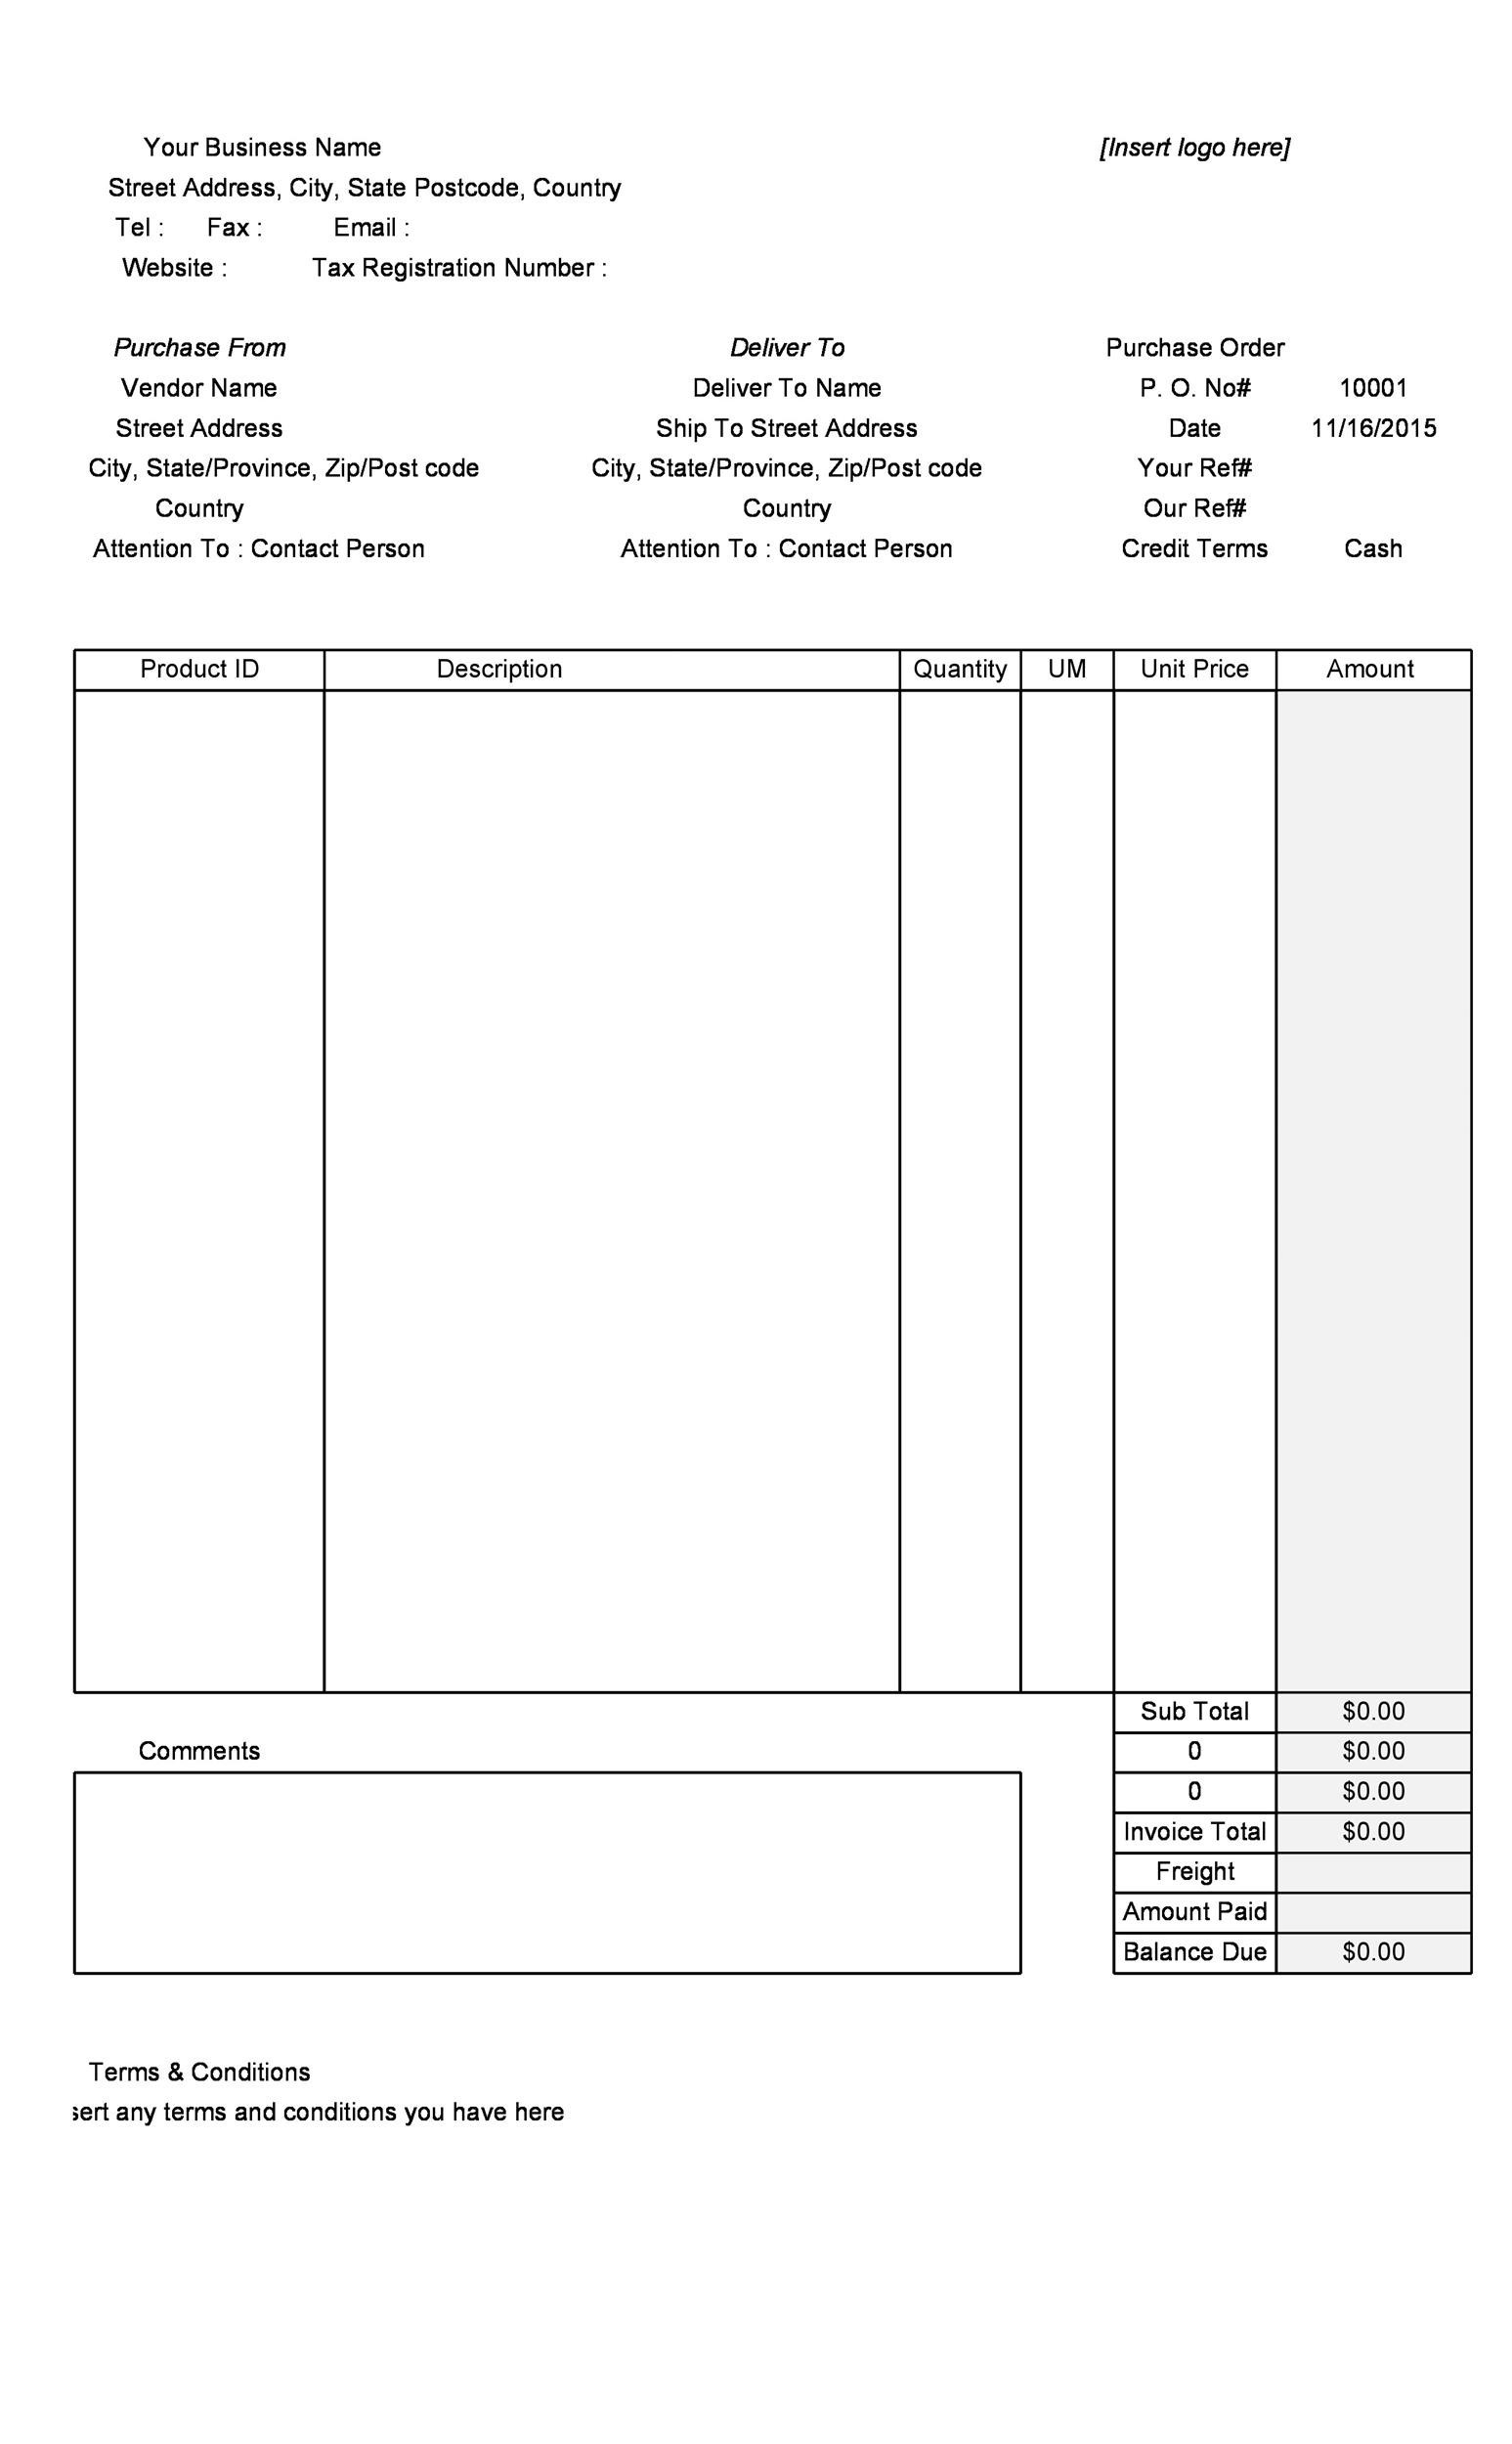 Purchase Order Download DocTemplates